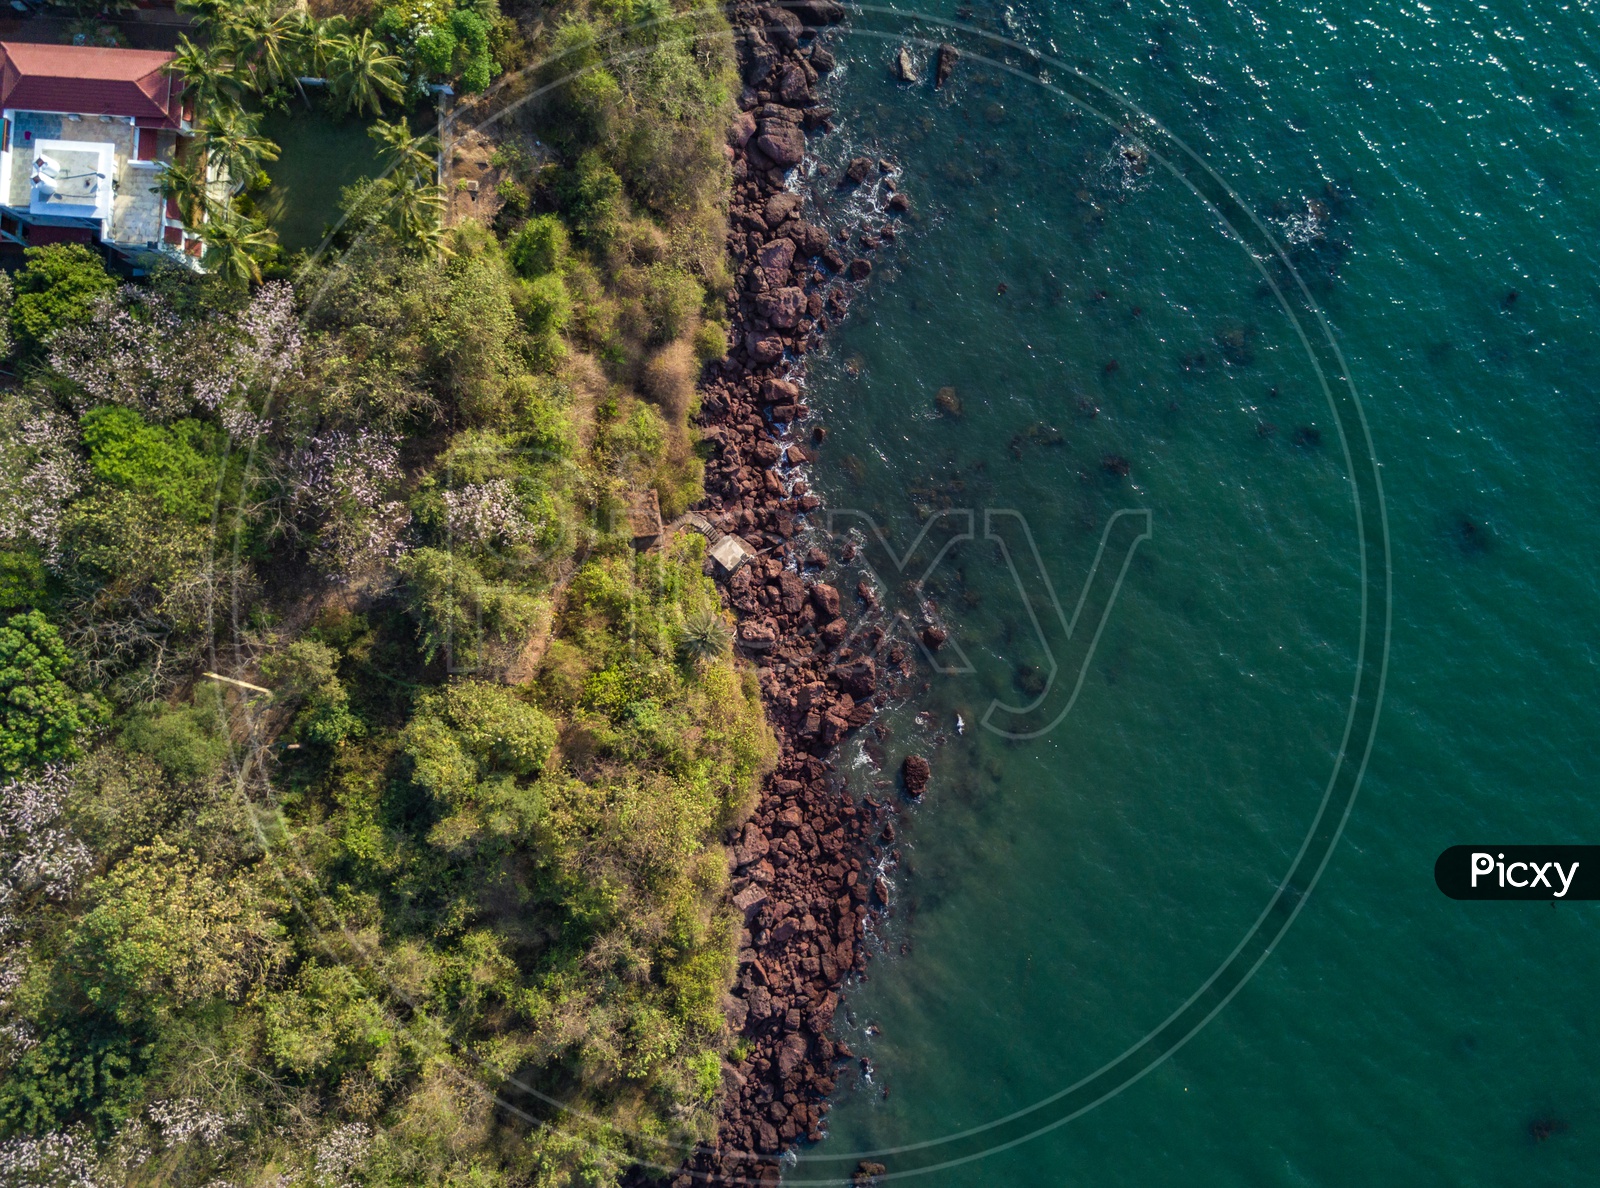 An aerial view of Dona Paula